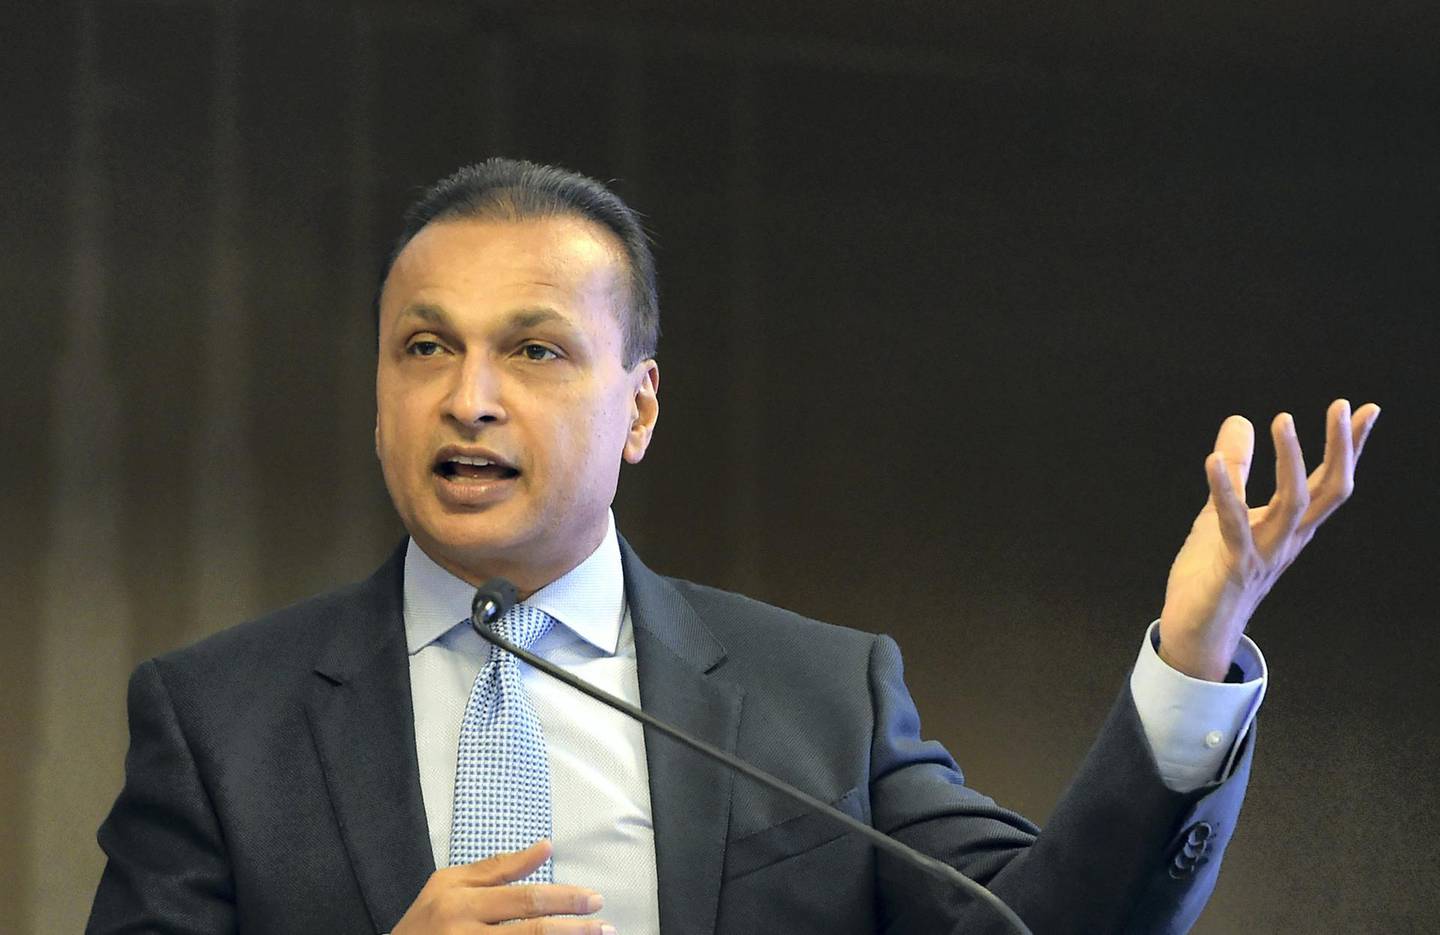 Indian industrialist and Reliance ADAG CEO Anil Ambani speaks during a news conference in Mumbai on June 2, 2017. - Indian billionaire Anil Ambani insisted June 2 that debt-saddled Reliance Communications had a bright future as he moved to reassure investors who are worried that the telecoms company is close to defaulting on loans. (Photo by PUNIT PARANJPE / AFP)